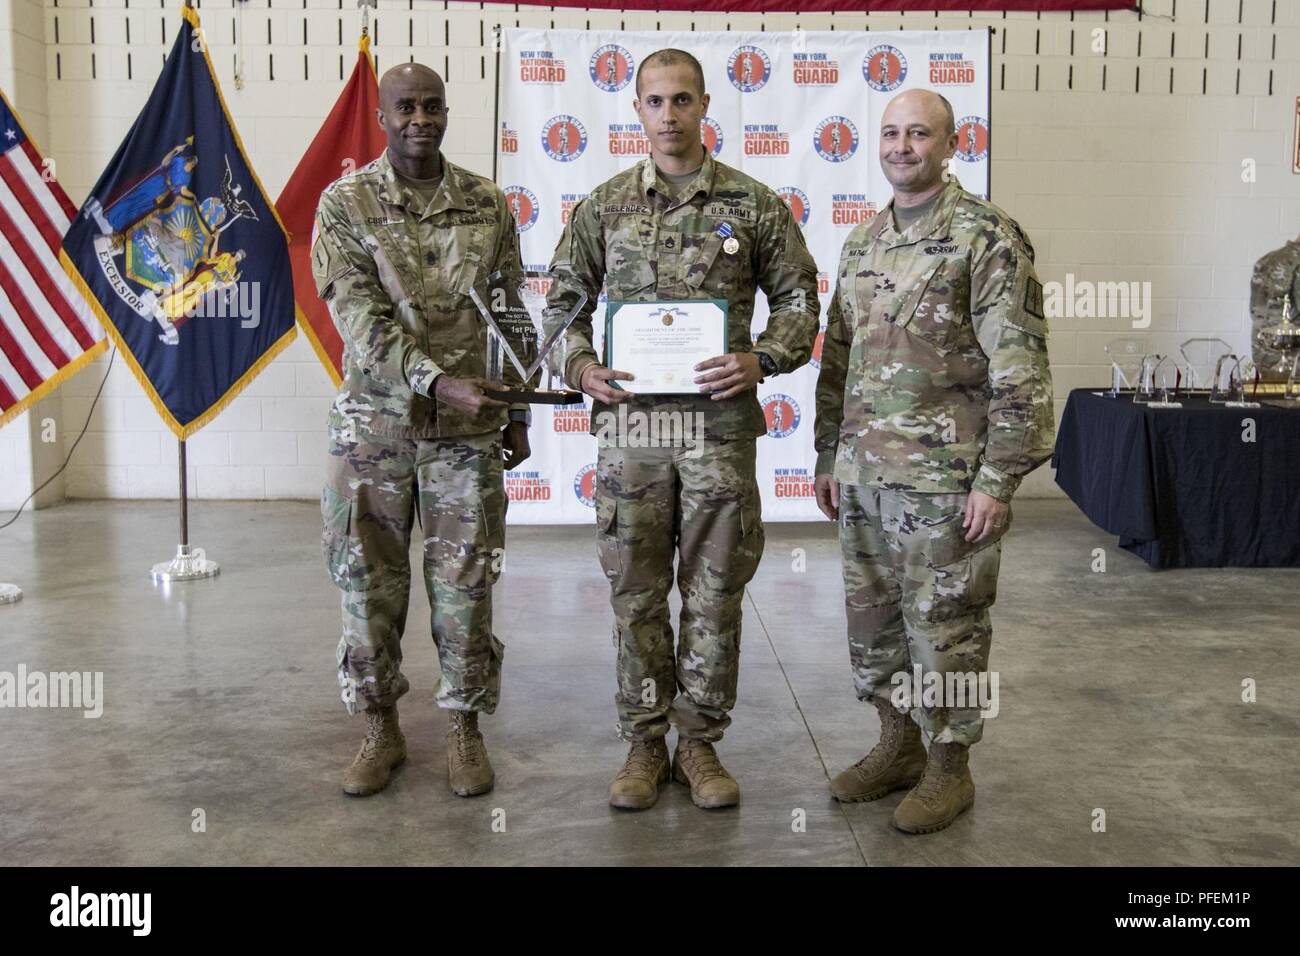 U.S. Army Staff Sgt. Matthew Melendez, an infantryman assigned to Headquarters Company, 1st Battalion, 69th Infantry Regiment, New York Army National Guard, receives an Army Achievement Medal and the Sgt. Thomas Baker Individual Combat Pistol Match 1st Place Award from Brig. Gen. Michel Natali, commander of the 53rd Troop Command, and Command Sgt. Maj. Corey Cush, senior enlisted advisor of the 53rd Troop Command, New York Army National Guard, following the 39th Annual Adjutant General’s Marksmanship Competition at Camp Smith Training Site, N.Y., June 3, 2018. The three-day event features mult Stock Photo